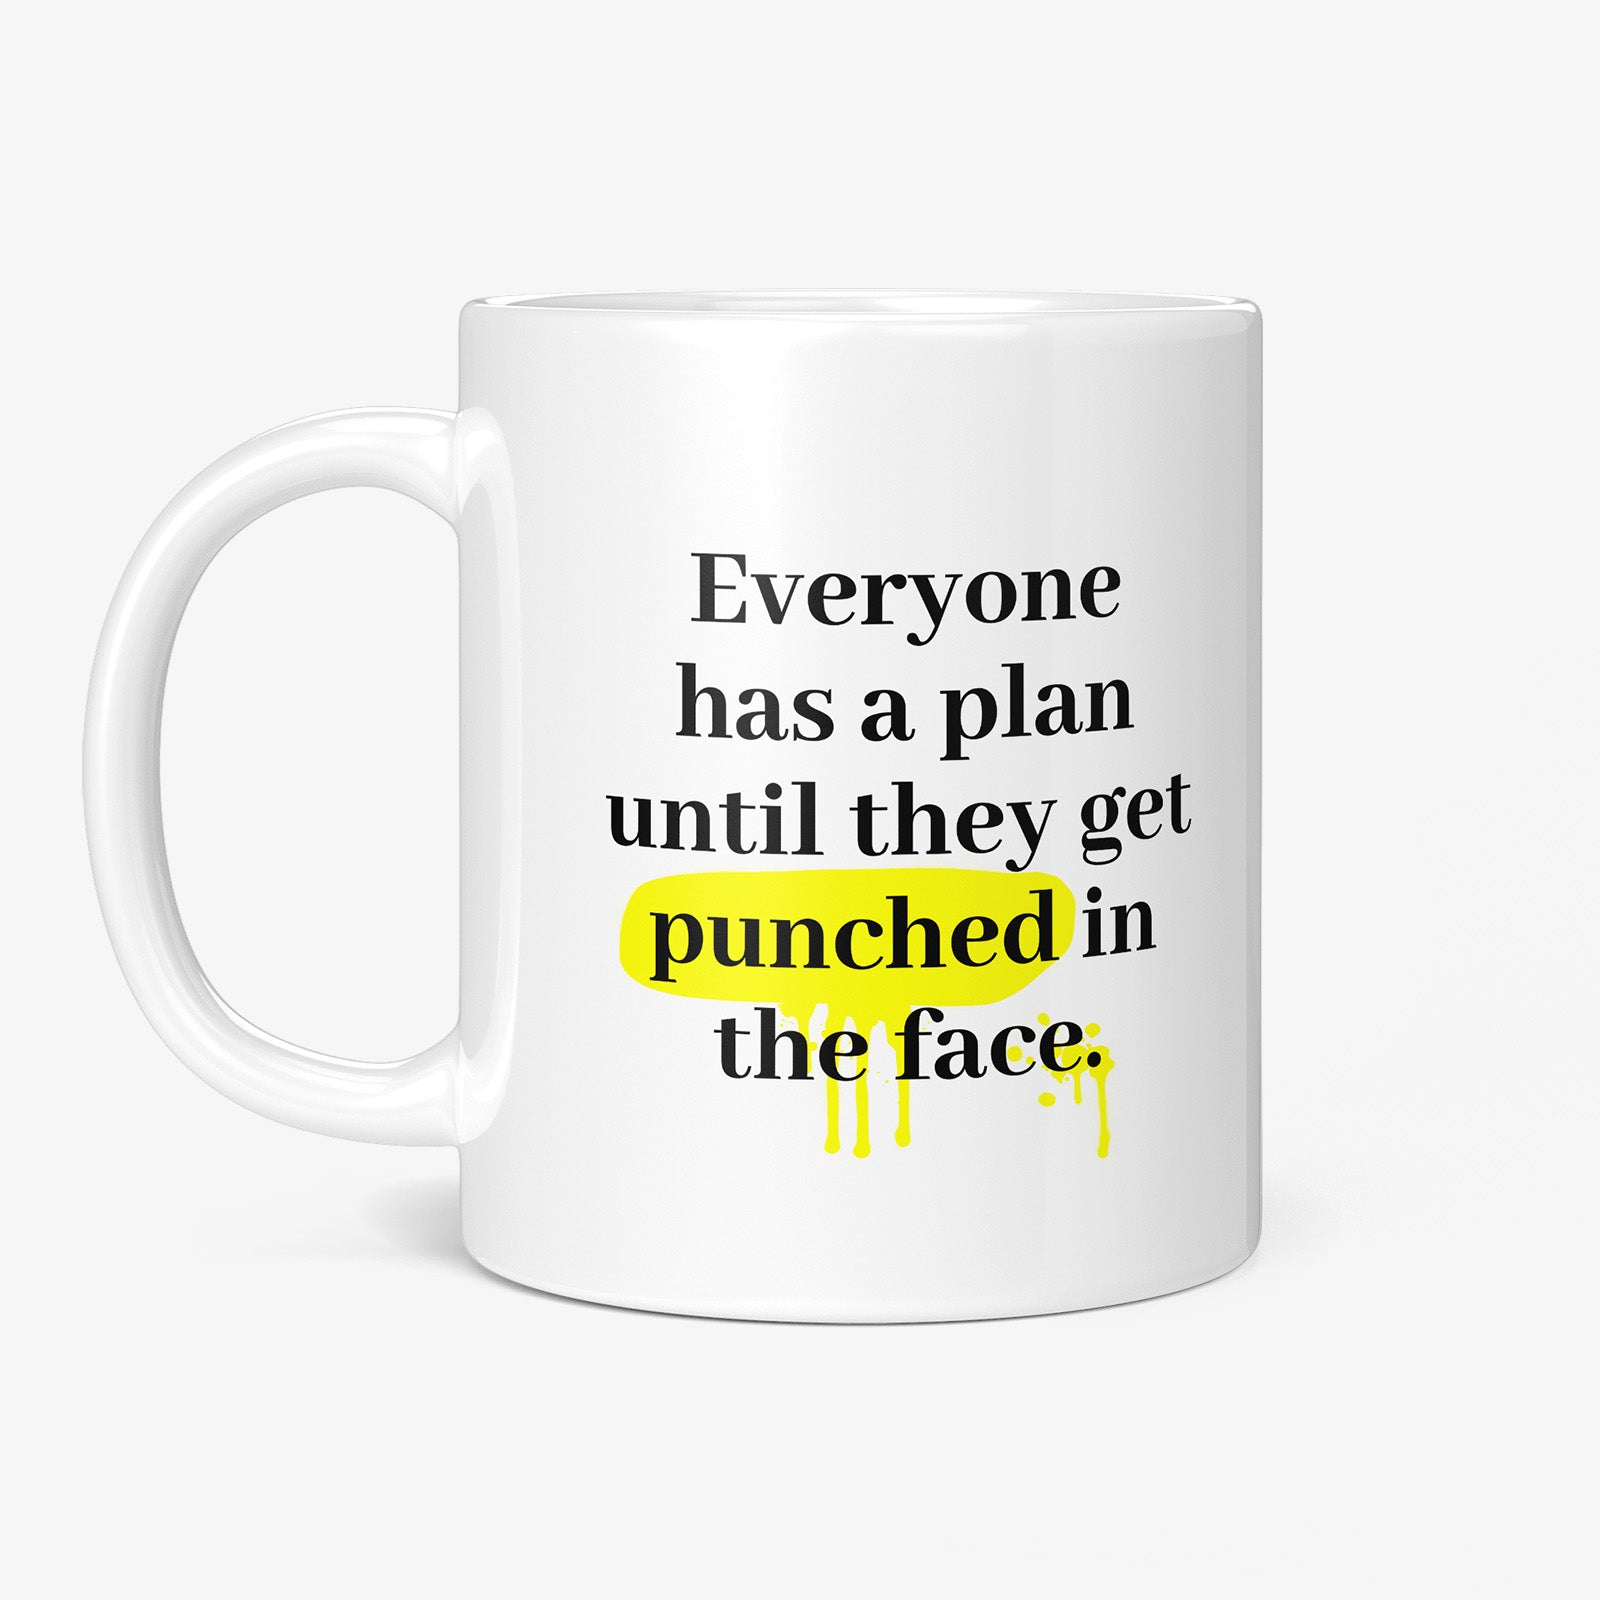 Be inspired by Mike Tyson's famous quote, "Everyone has a plan until they get punched in the face" on this white and glossy 11oz coffee mug with the handle on the left.